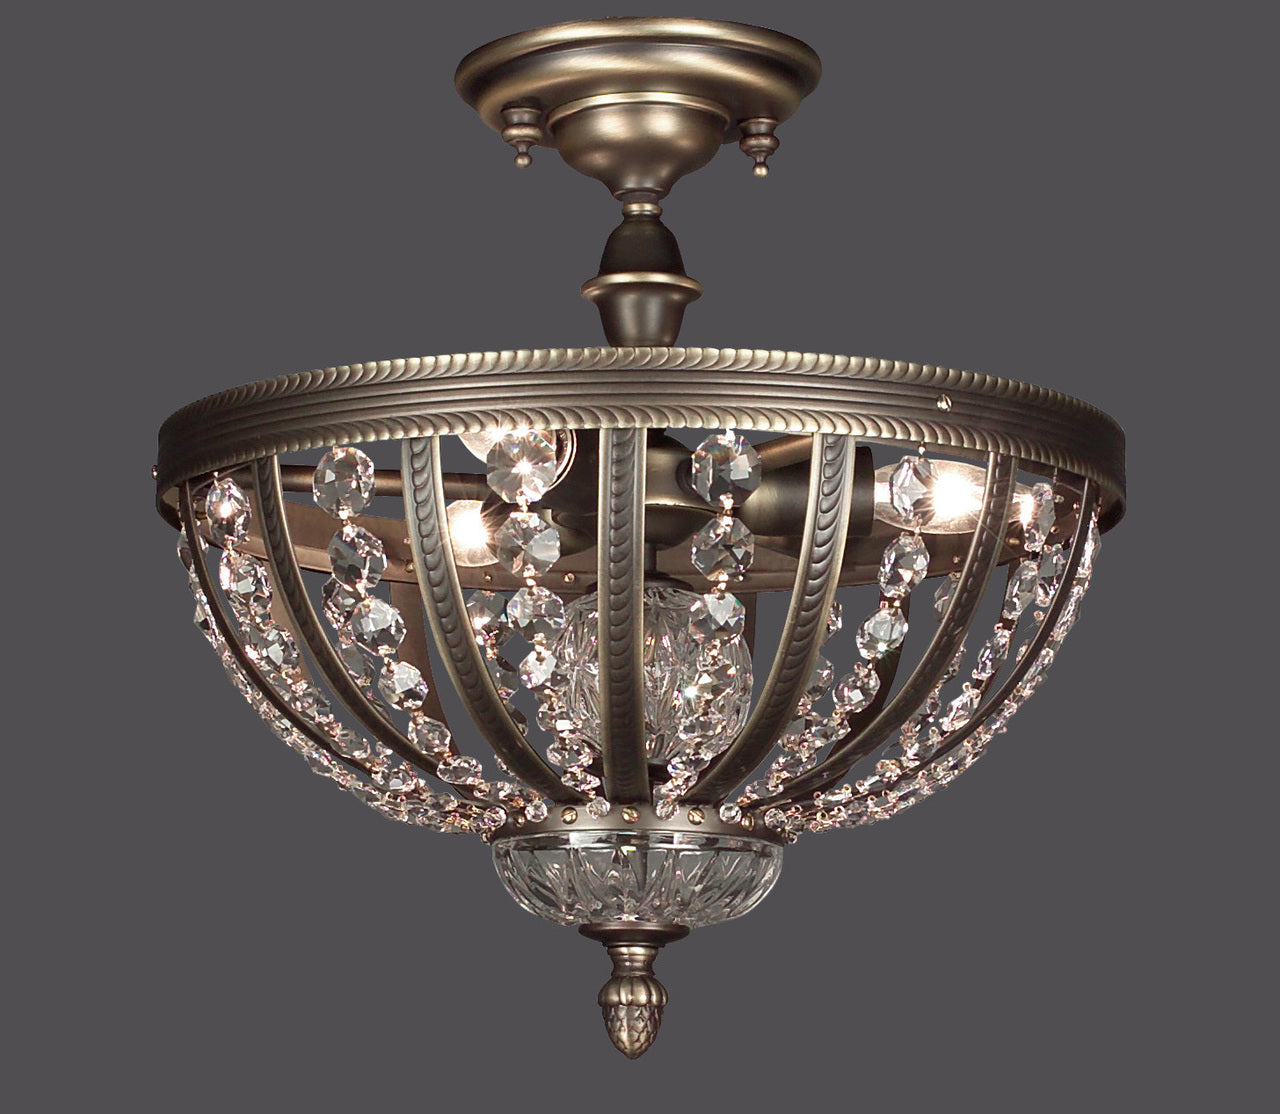 Classic Lighting 1923 RB S Terragona Crystal Flushmount in Roman Bronze (Imported from Spain)